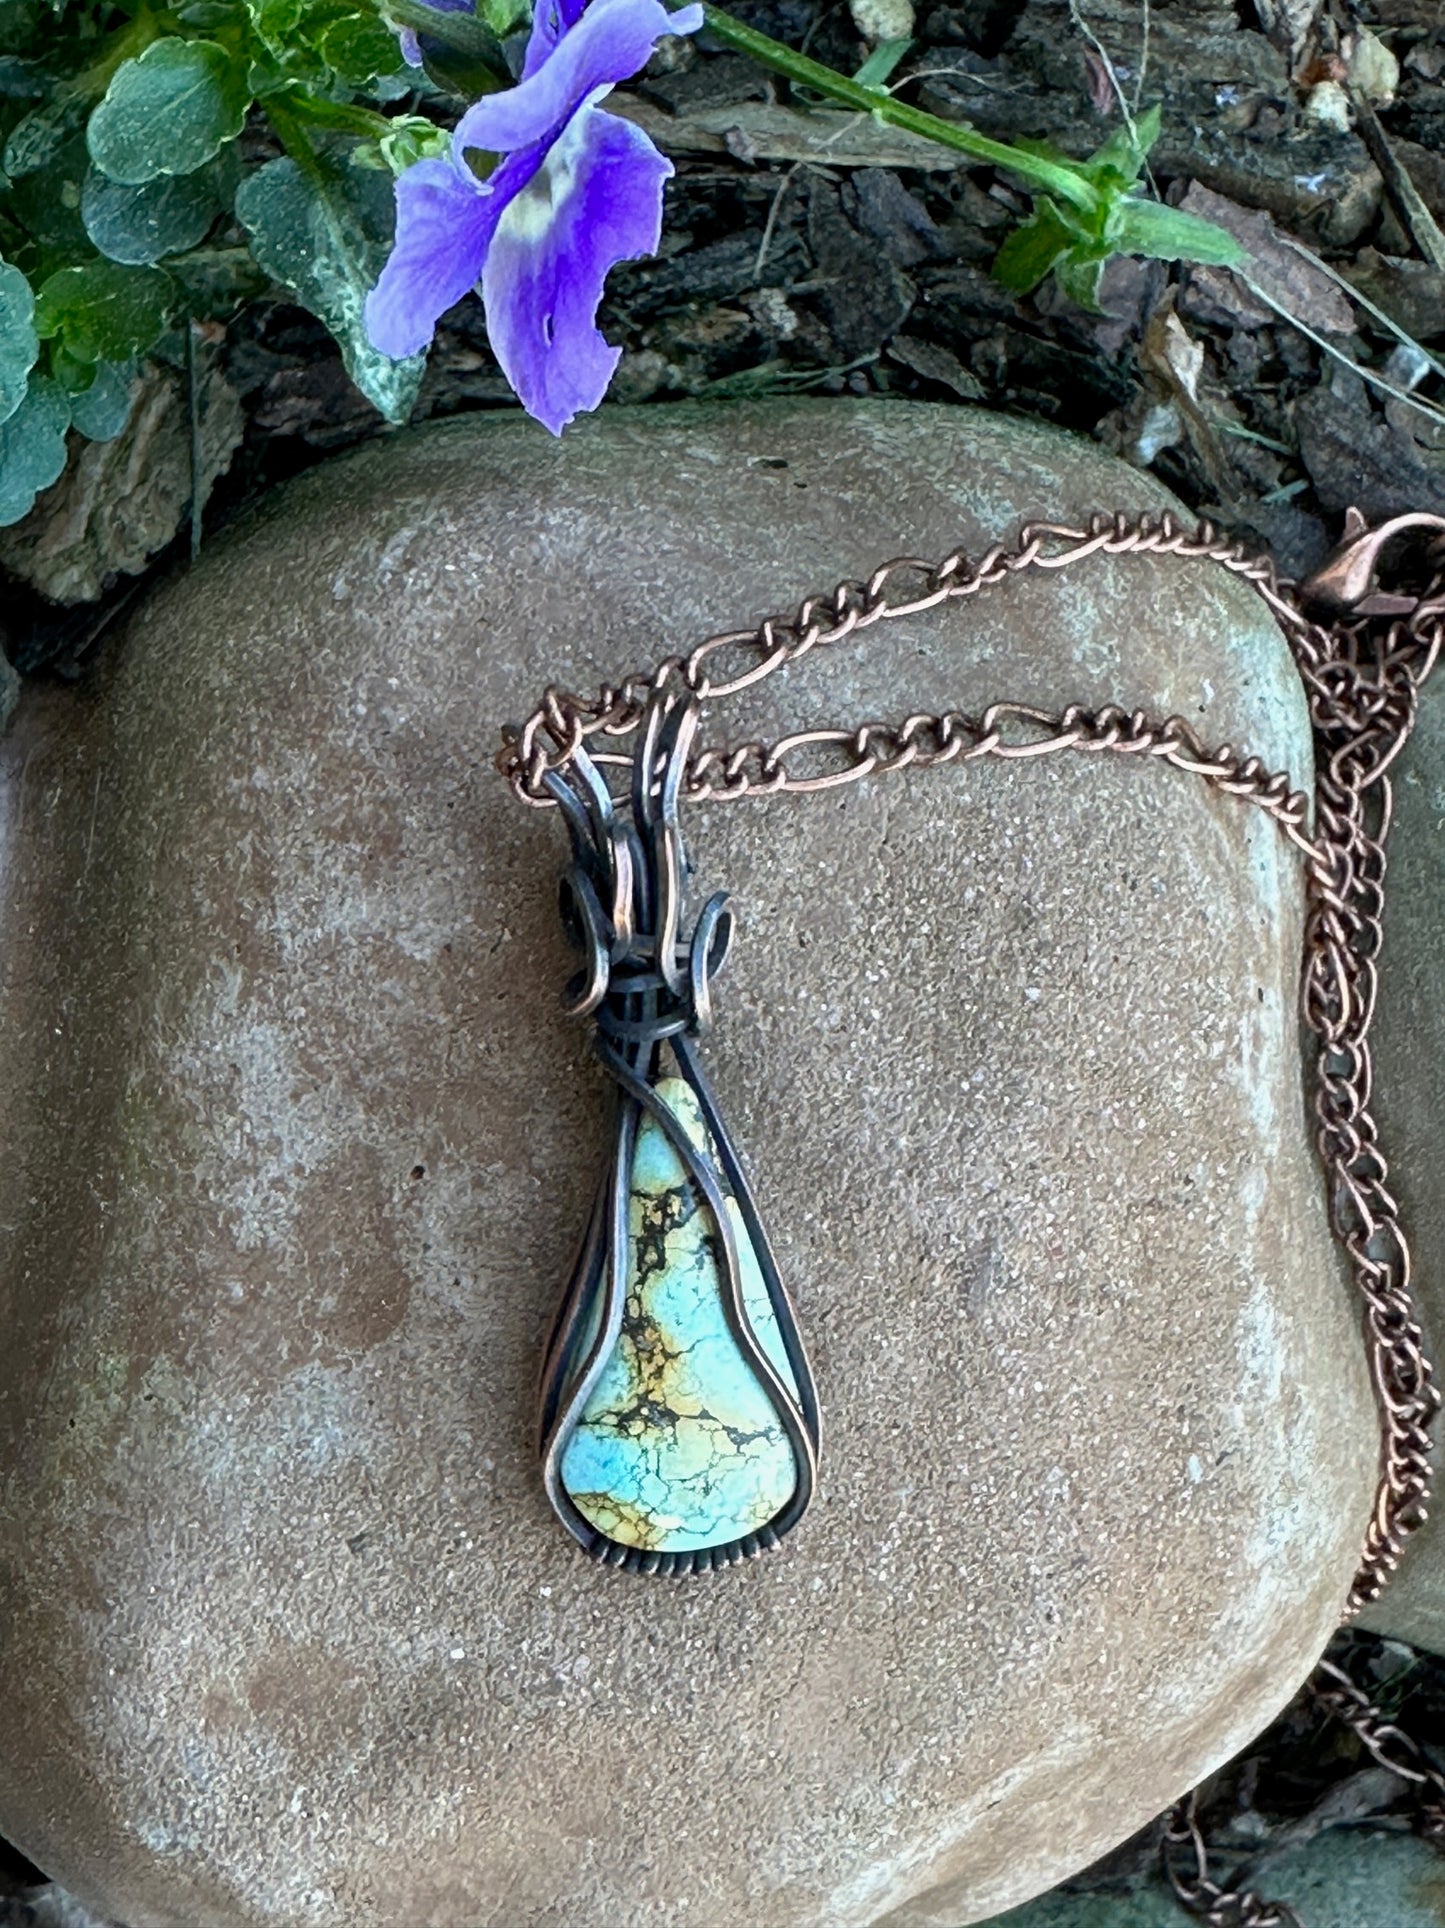 Handmade Turquoise Teardrop Pendant Wrapped In Copper Wire